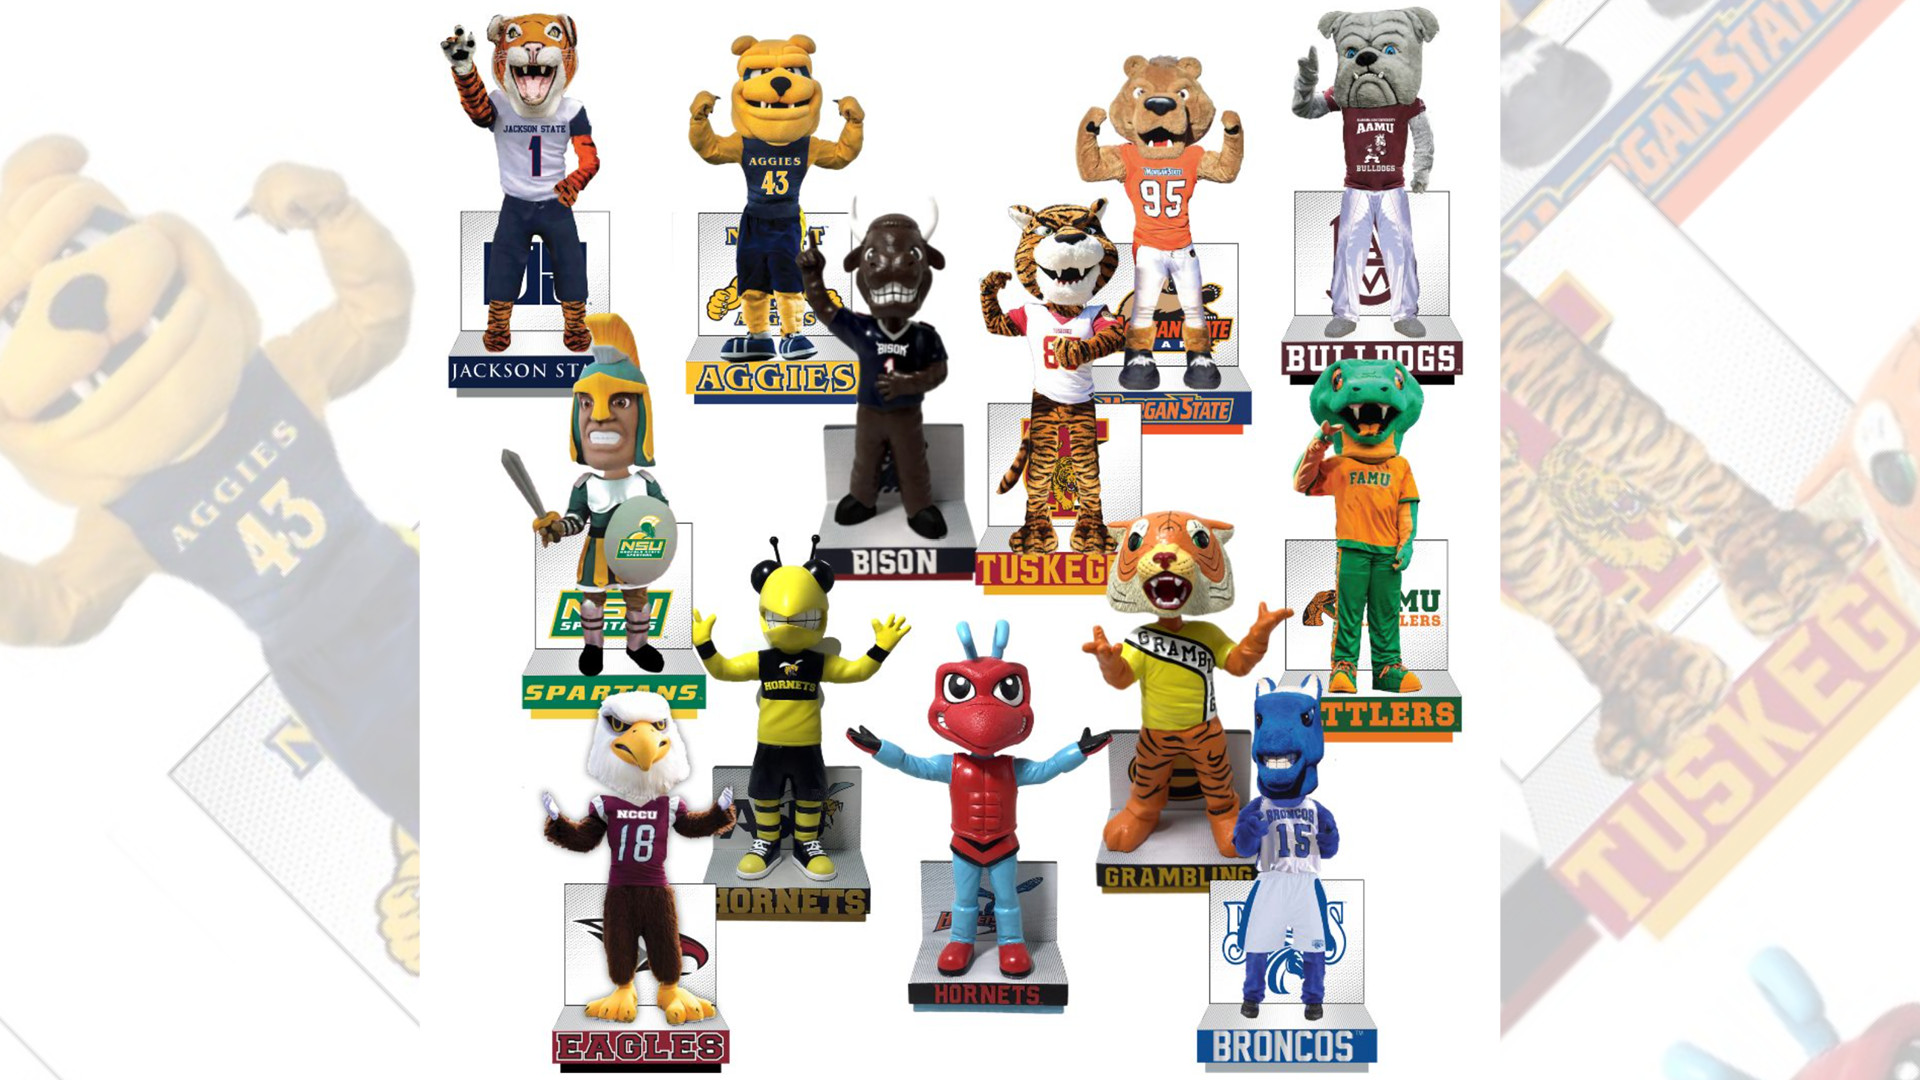 See the first Florida A&M University Rattlers bobblehead